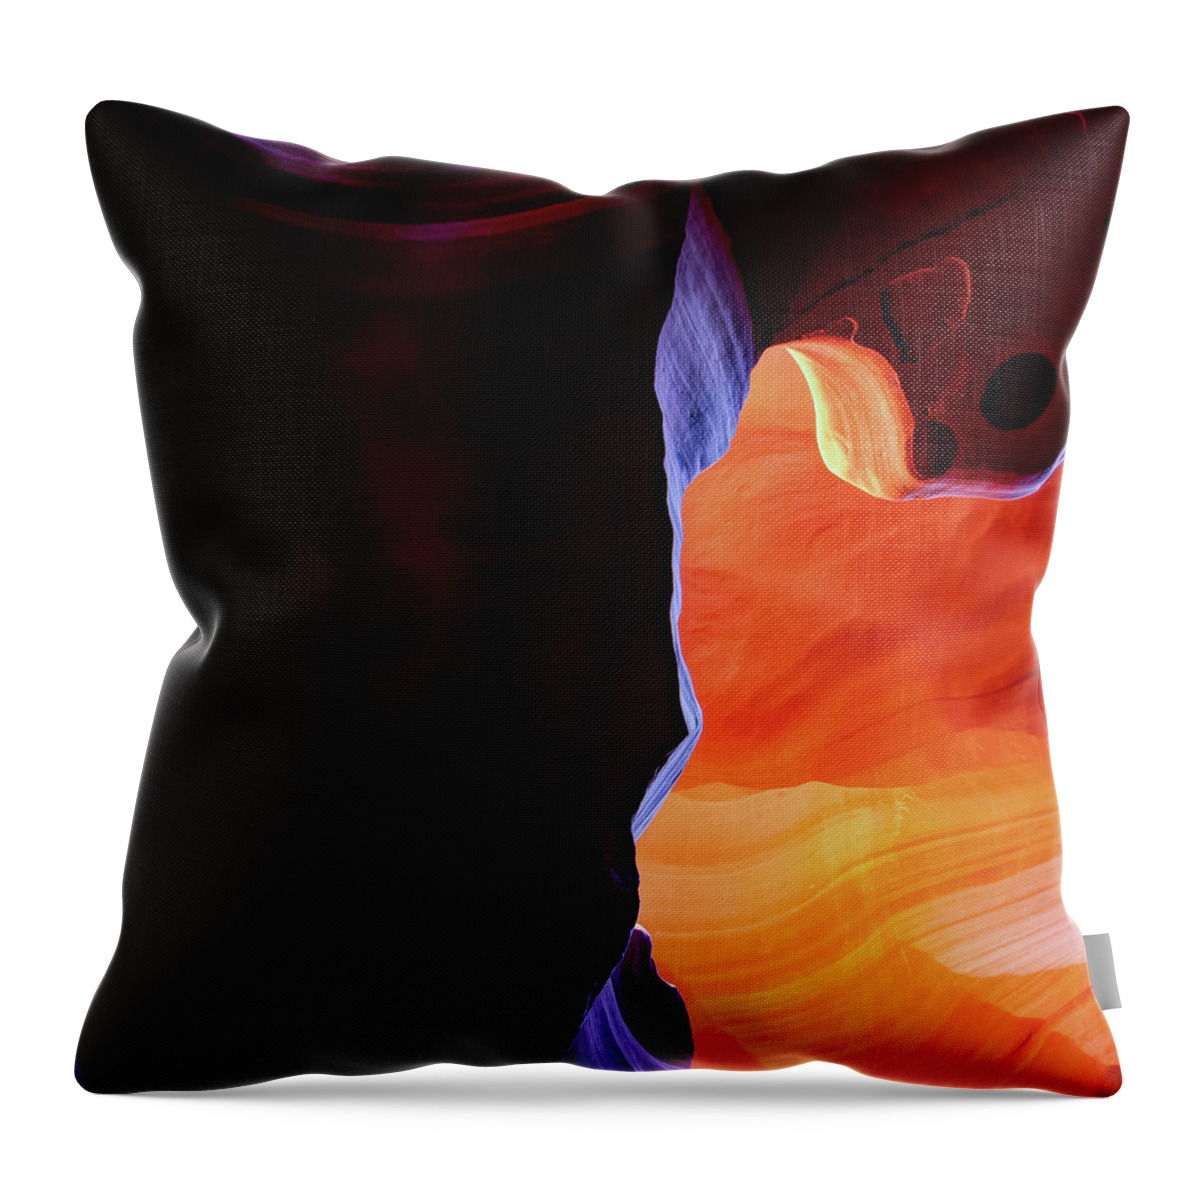 America Throw Pillow featuring the photograph Beyond The Wall - Antelope Canyon Arizona - Square by Gregory Ballos